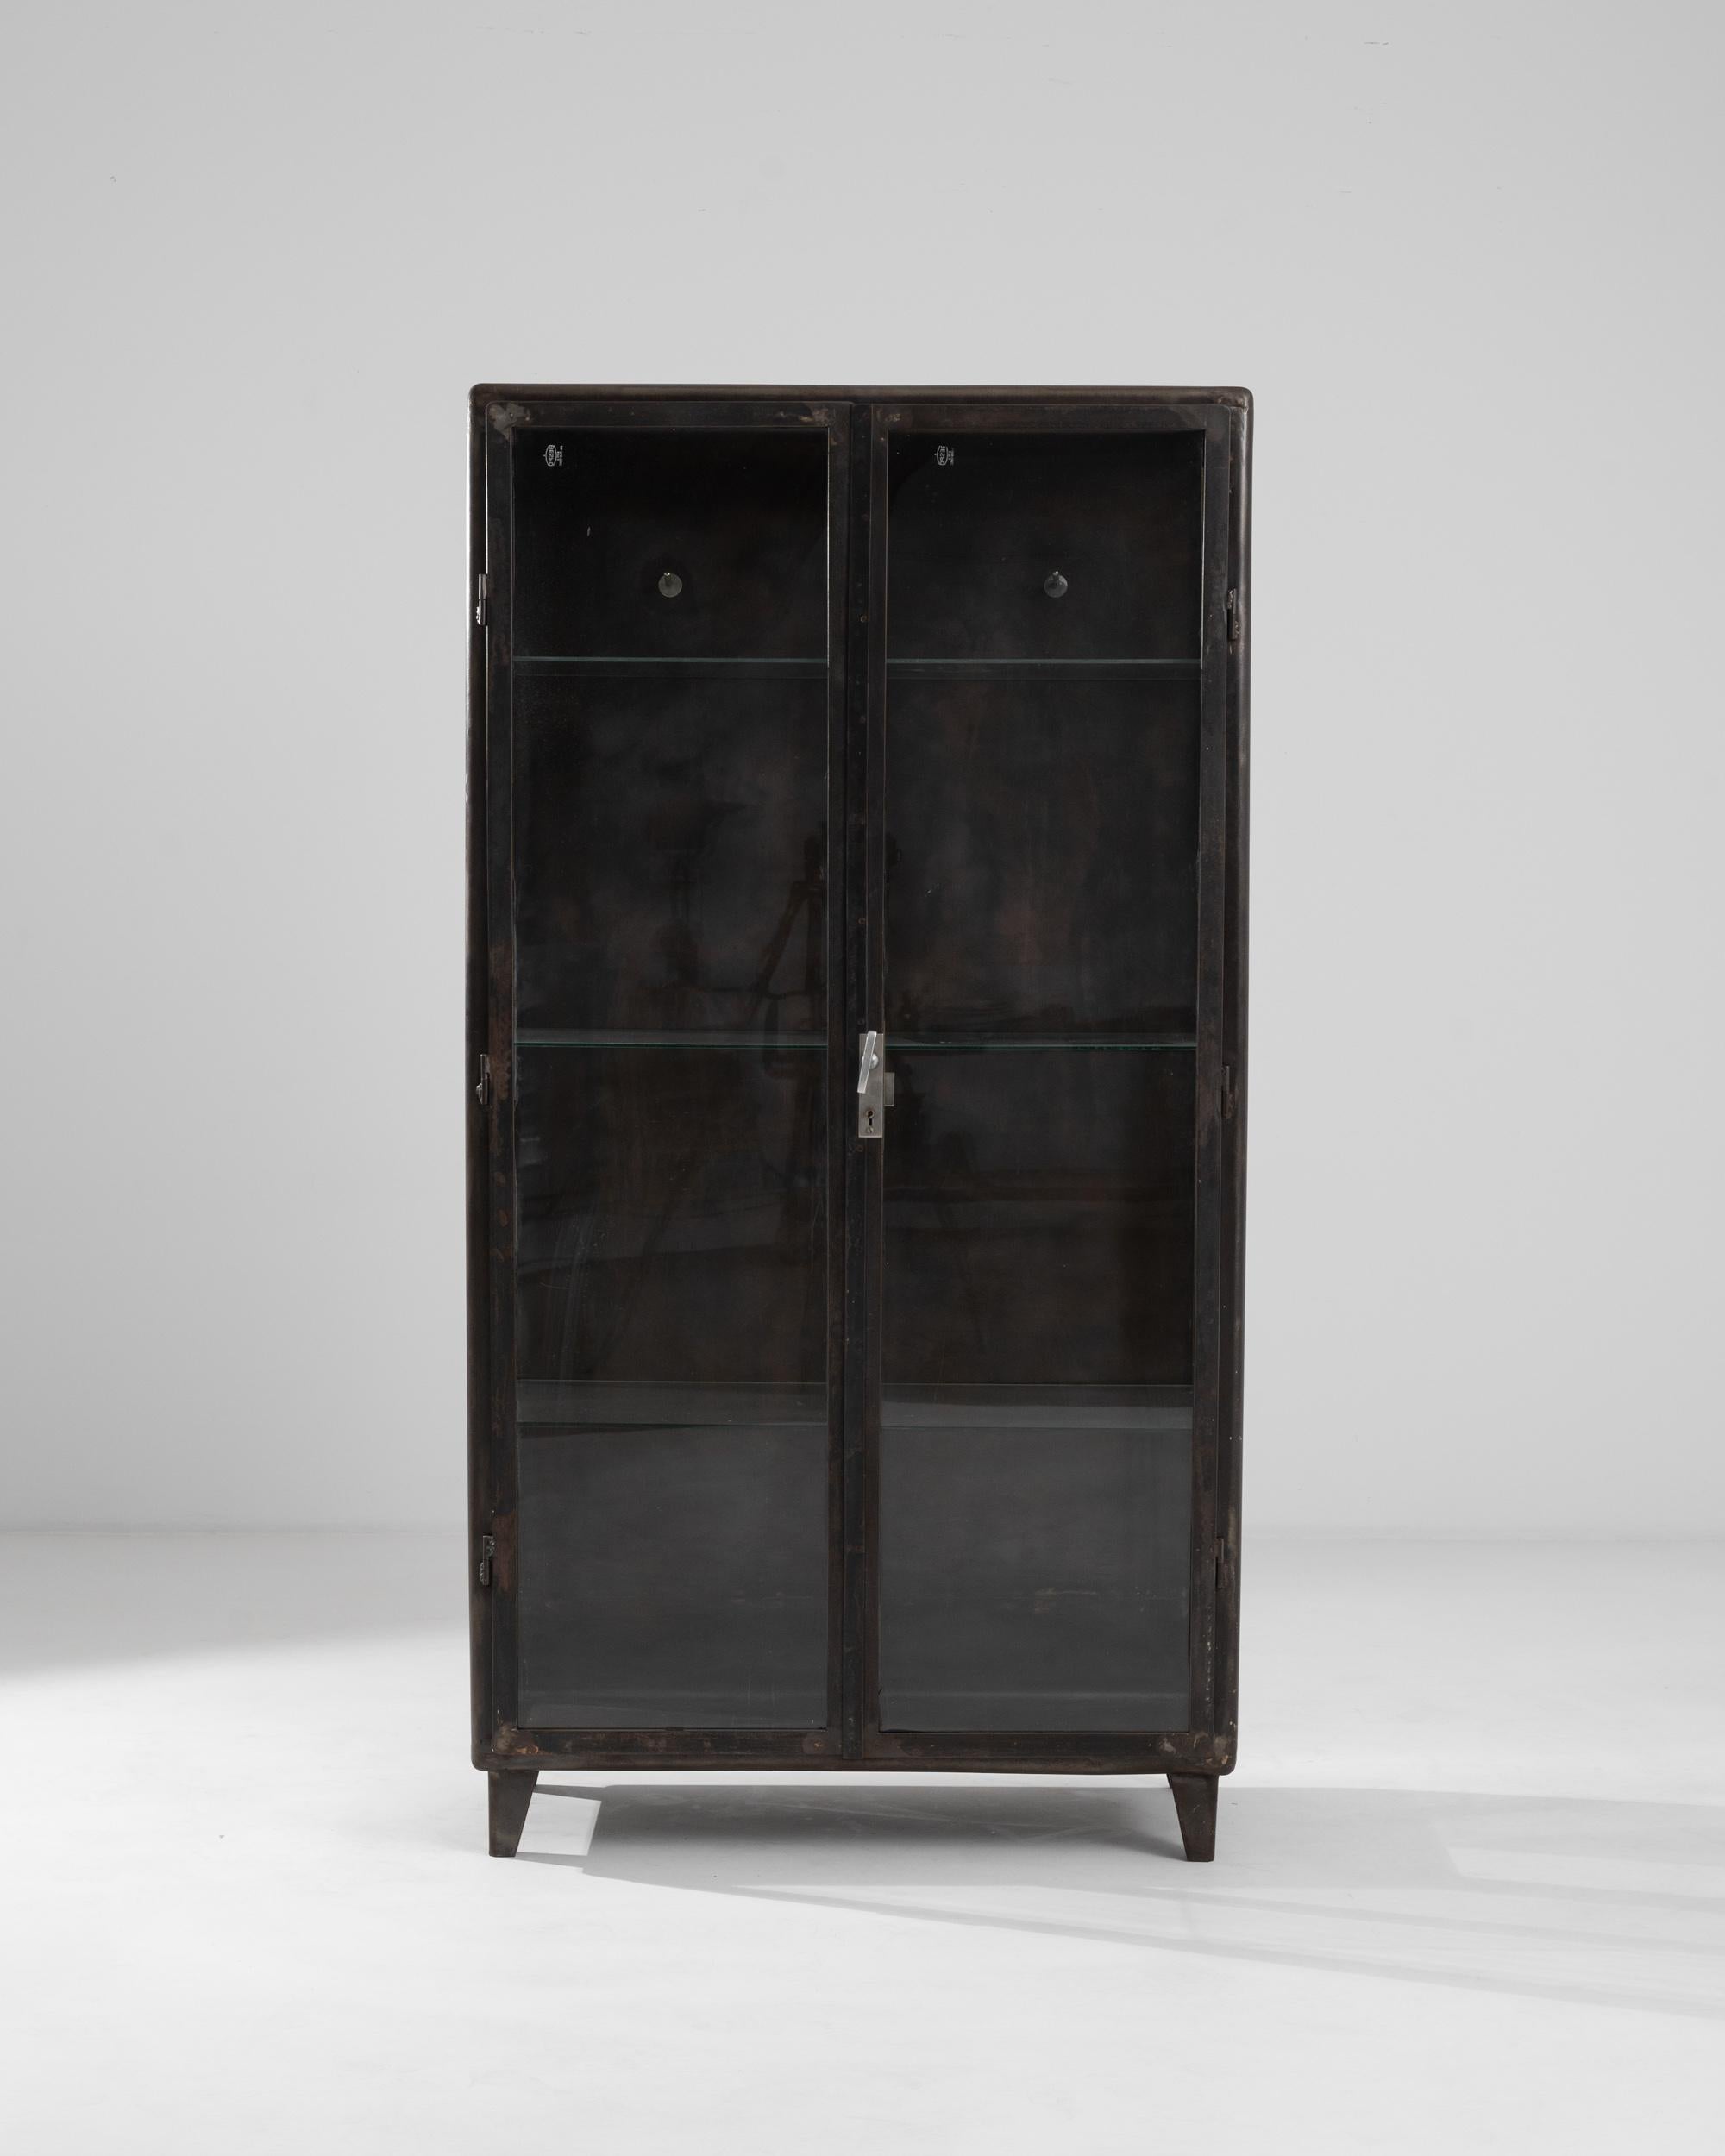 The 1950s Central European metal medical cabinet is a testament to the durability and elegance of industrial design. Its polished metal construction exudes a vintage charm that complements the minimalist aesthetic of modern interiors. Transparent